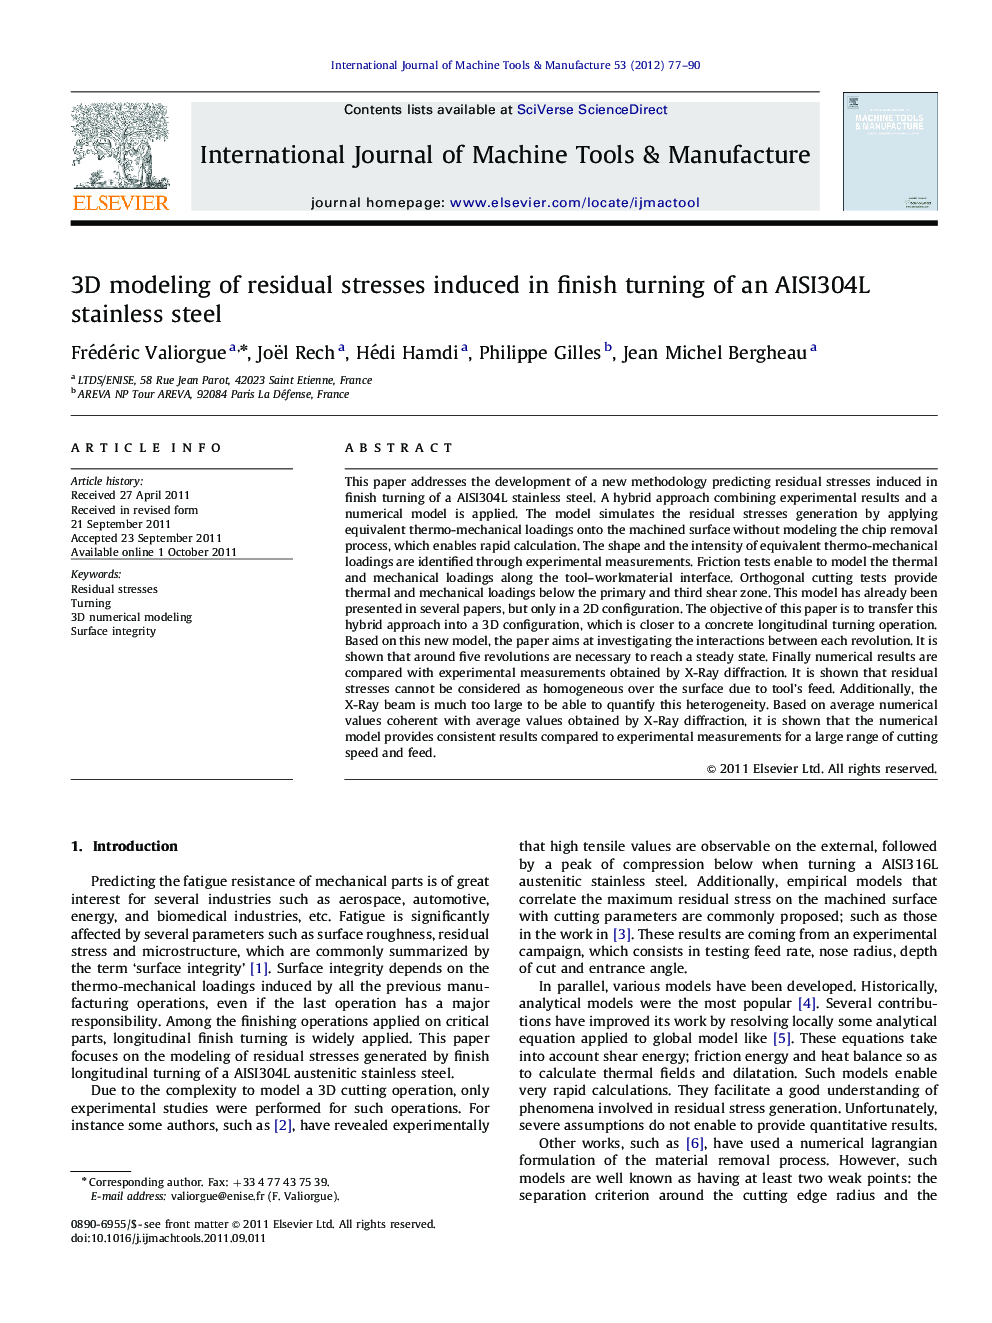 3D modeling of residual stresses induced in finish turning of an AISI304L stainless steel